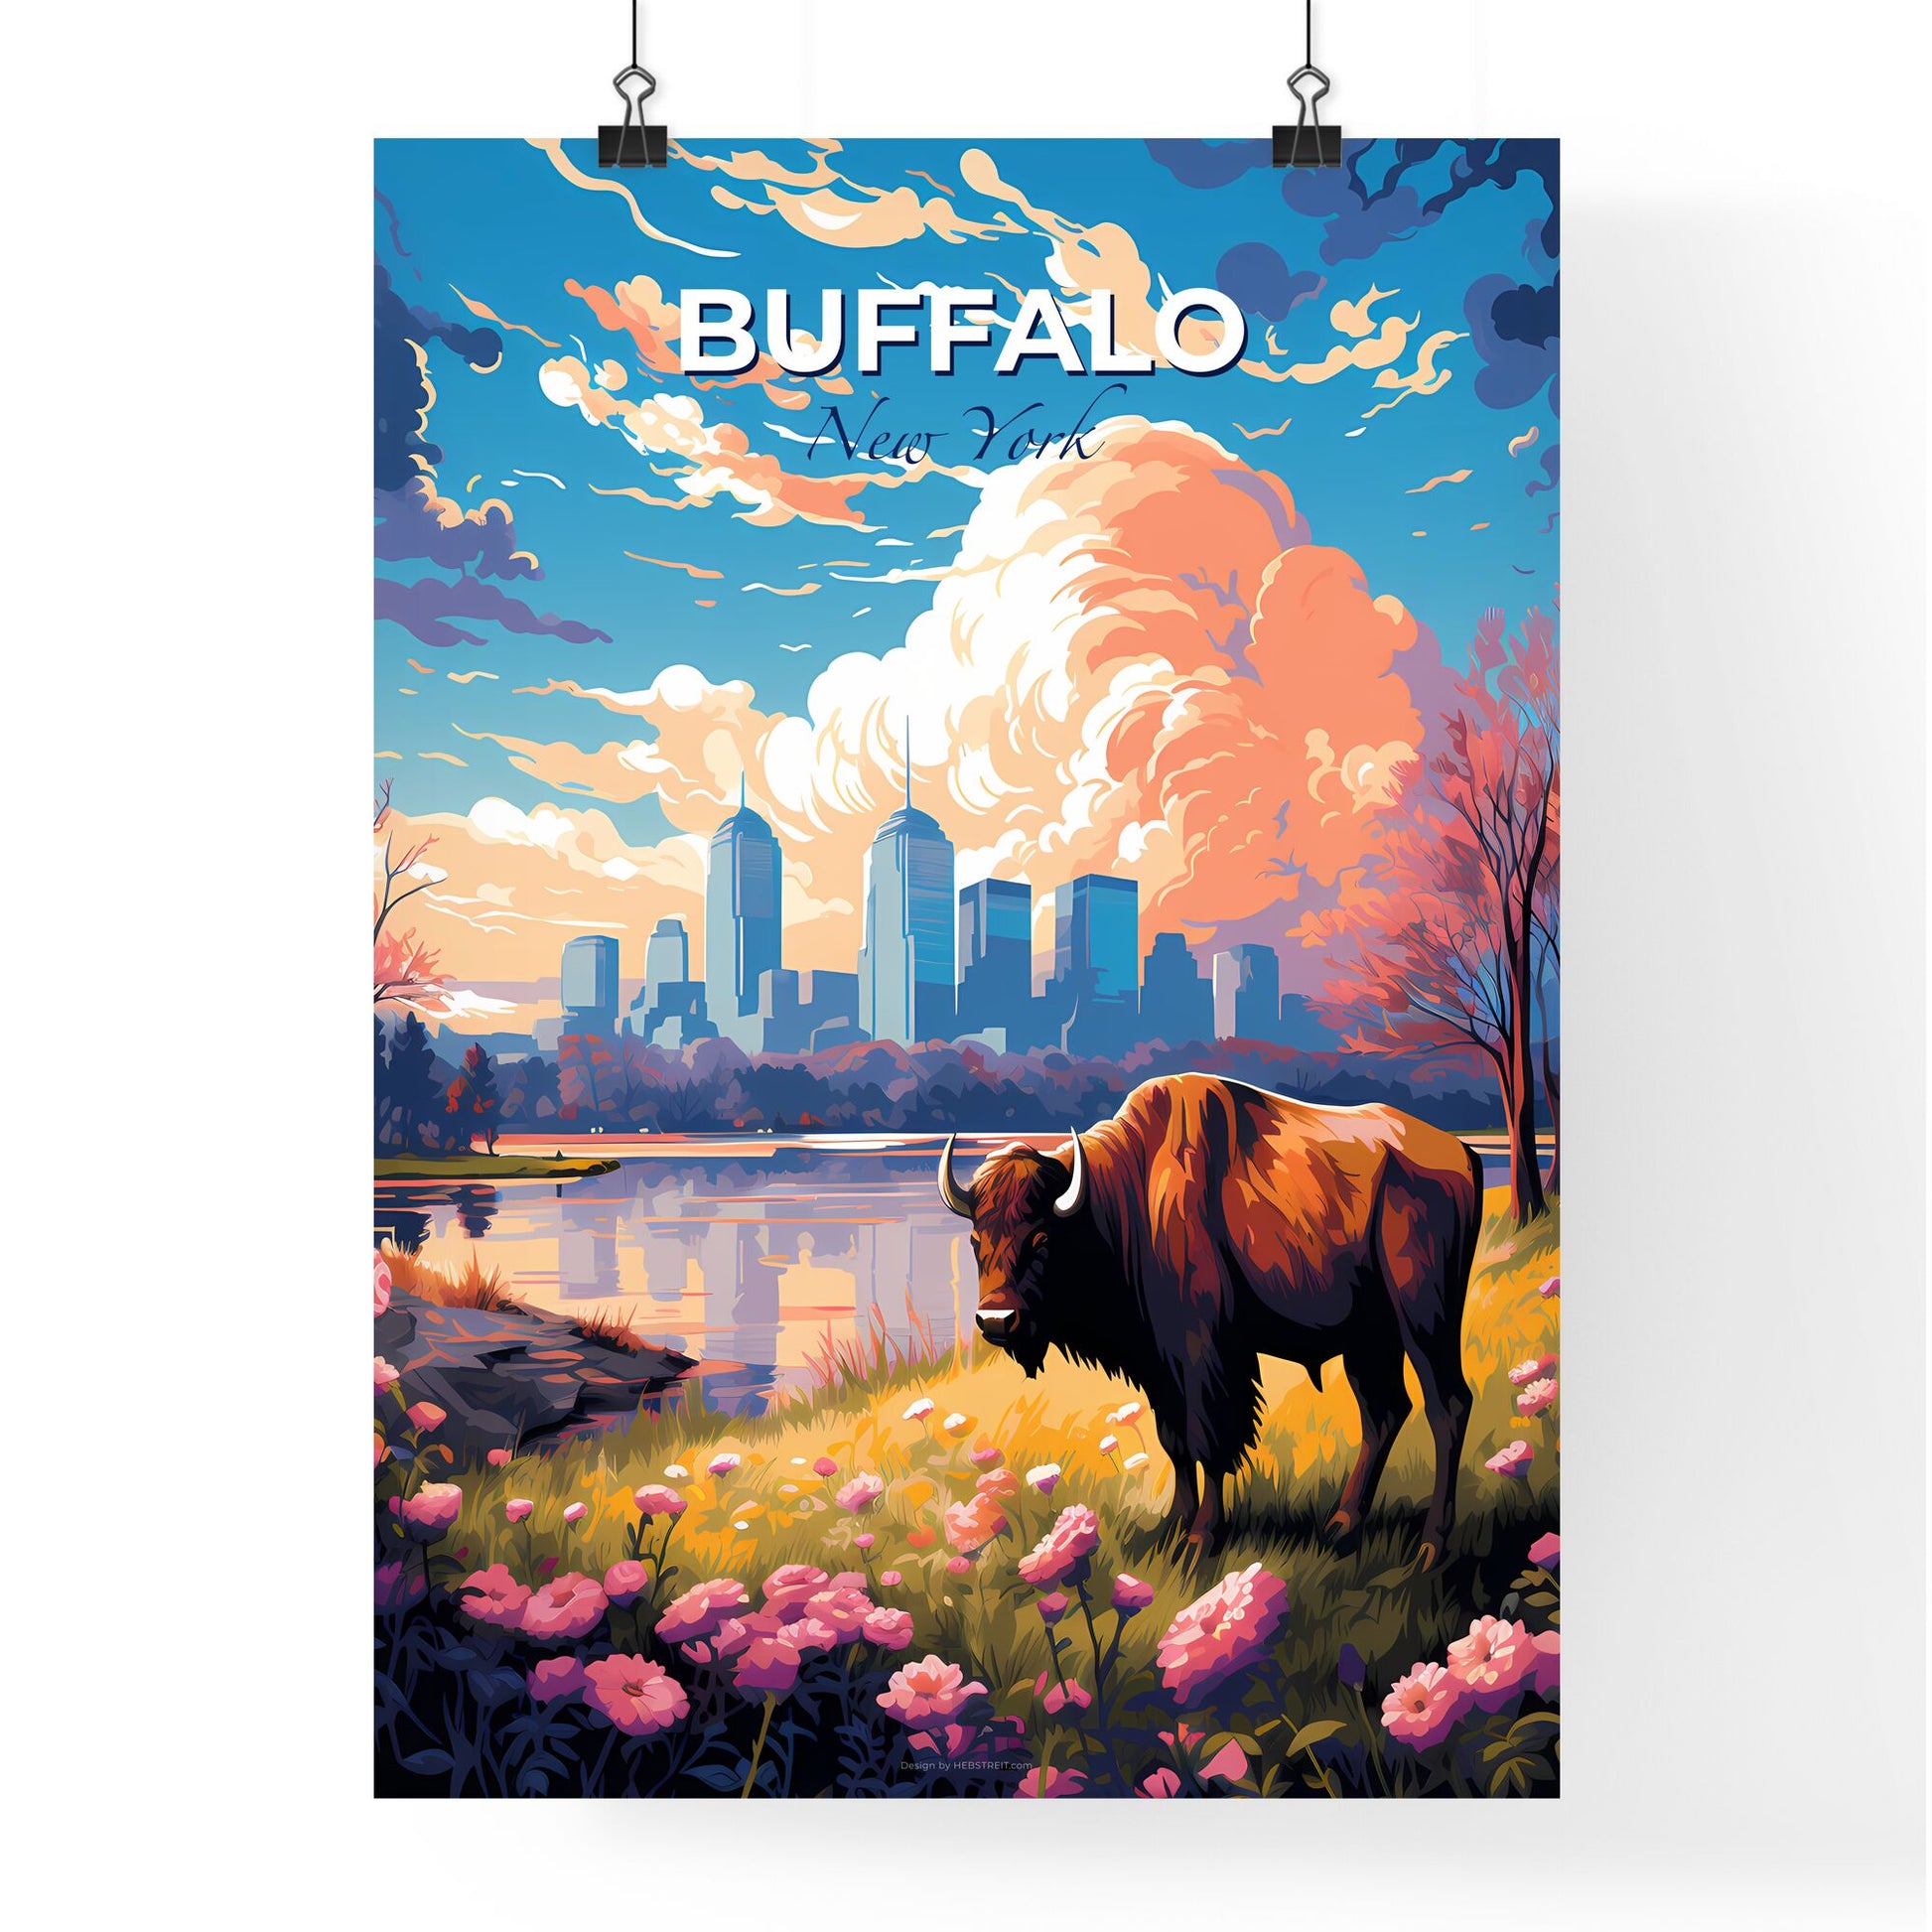 Buffalo New York Skyline - A Buffalo Standing In A Grassy Field Next To A Body Of Water - Customizable Travel Gift Default Title